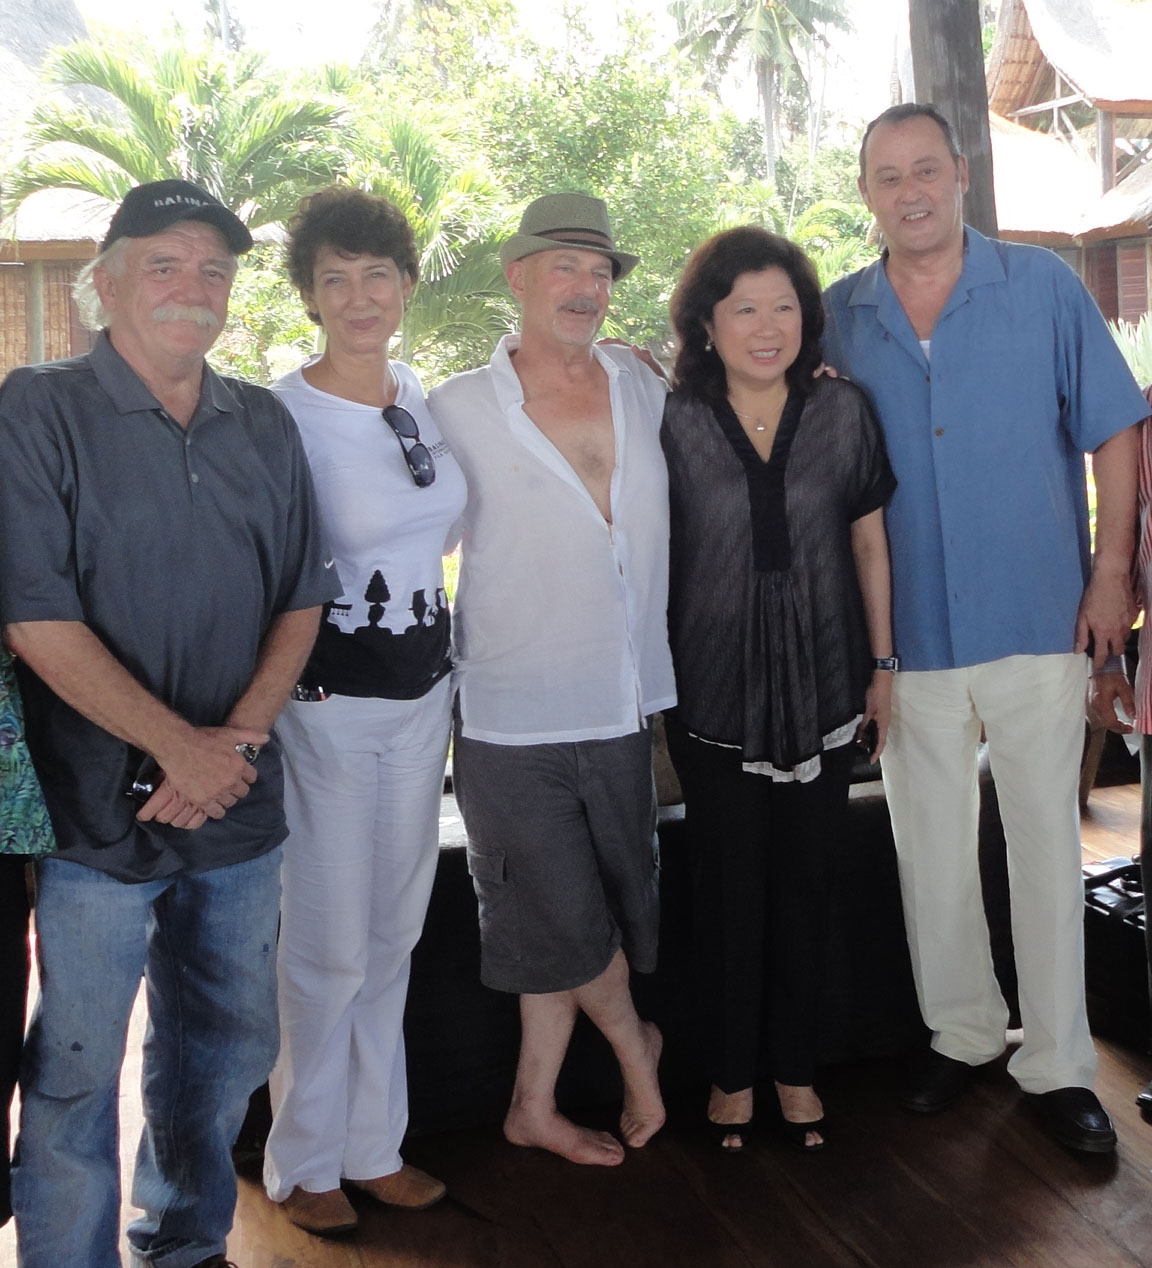 On set with Rob Cohen's I, ALEX CROSS, Minister Mari Pangestu and Jean Reno.